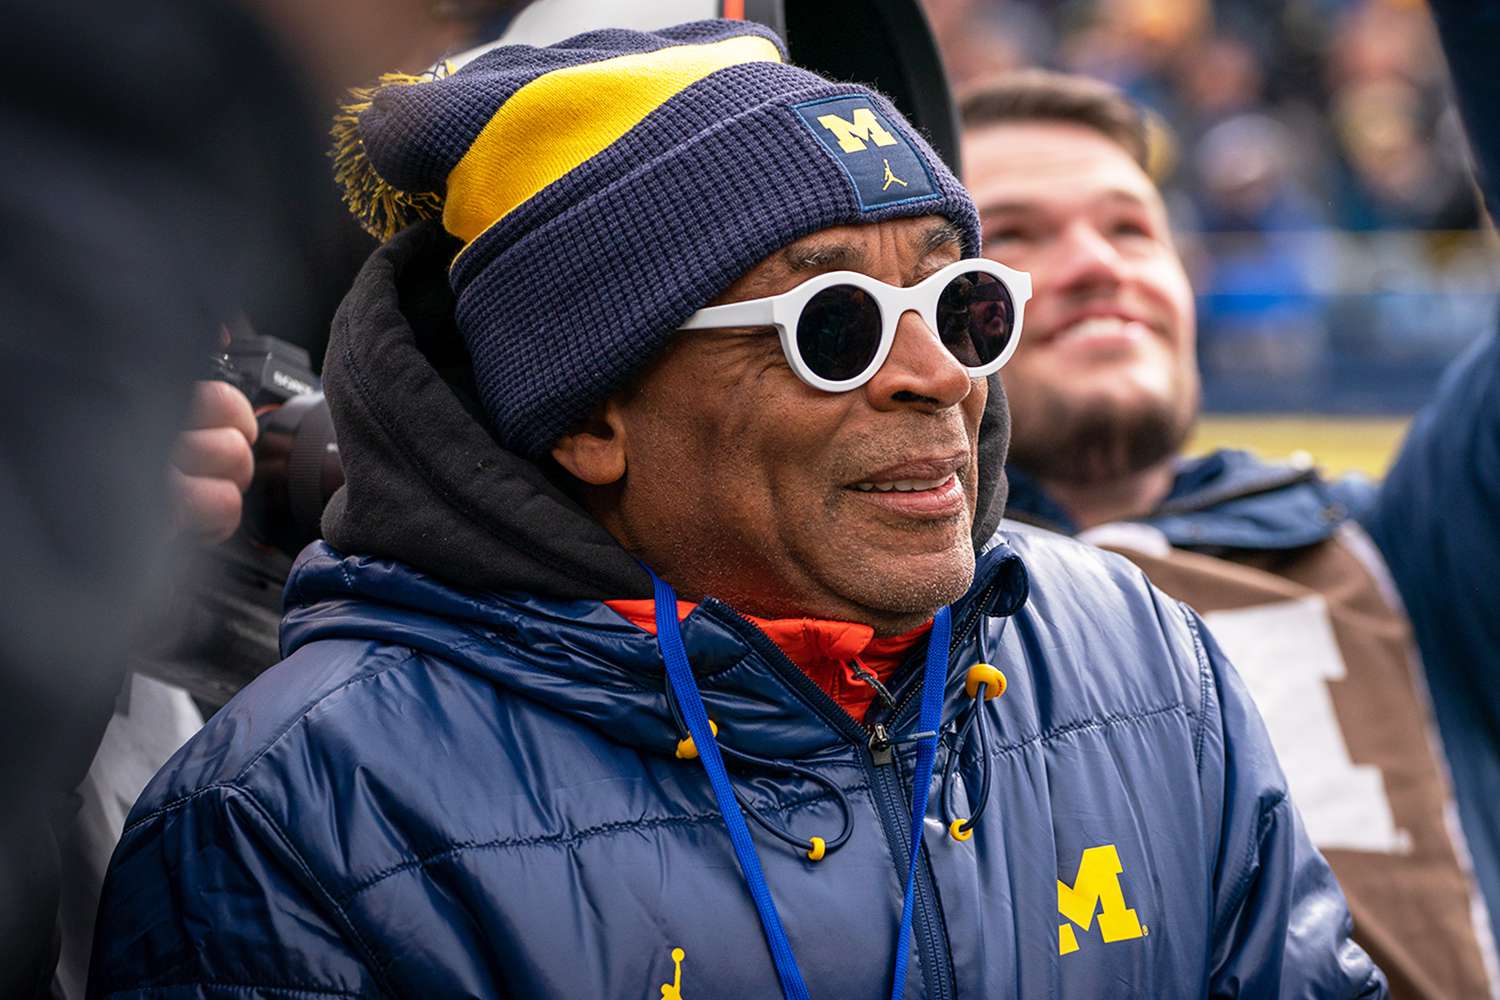 Spike Lee looks on as Colin Kaepernick greets fans before the Michigan spring football game at Michigan Stadium on April 2, 2022 in Ann Arbor, Michigan.